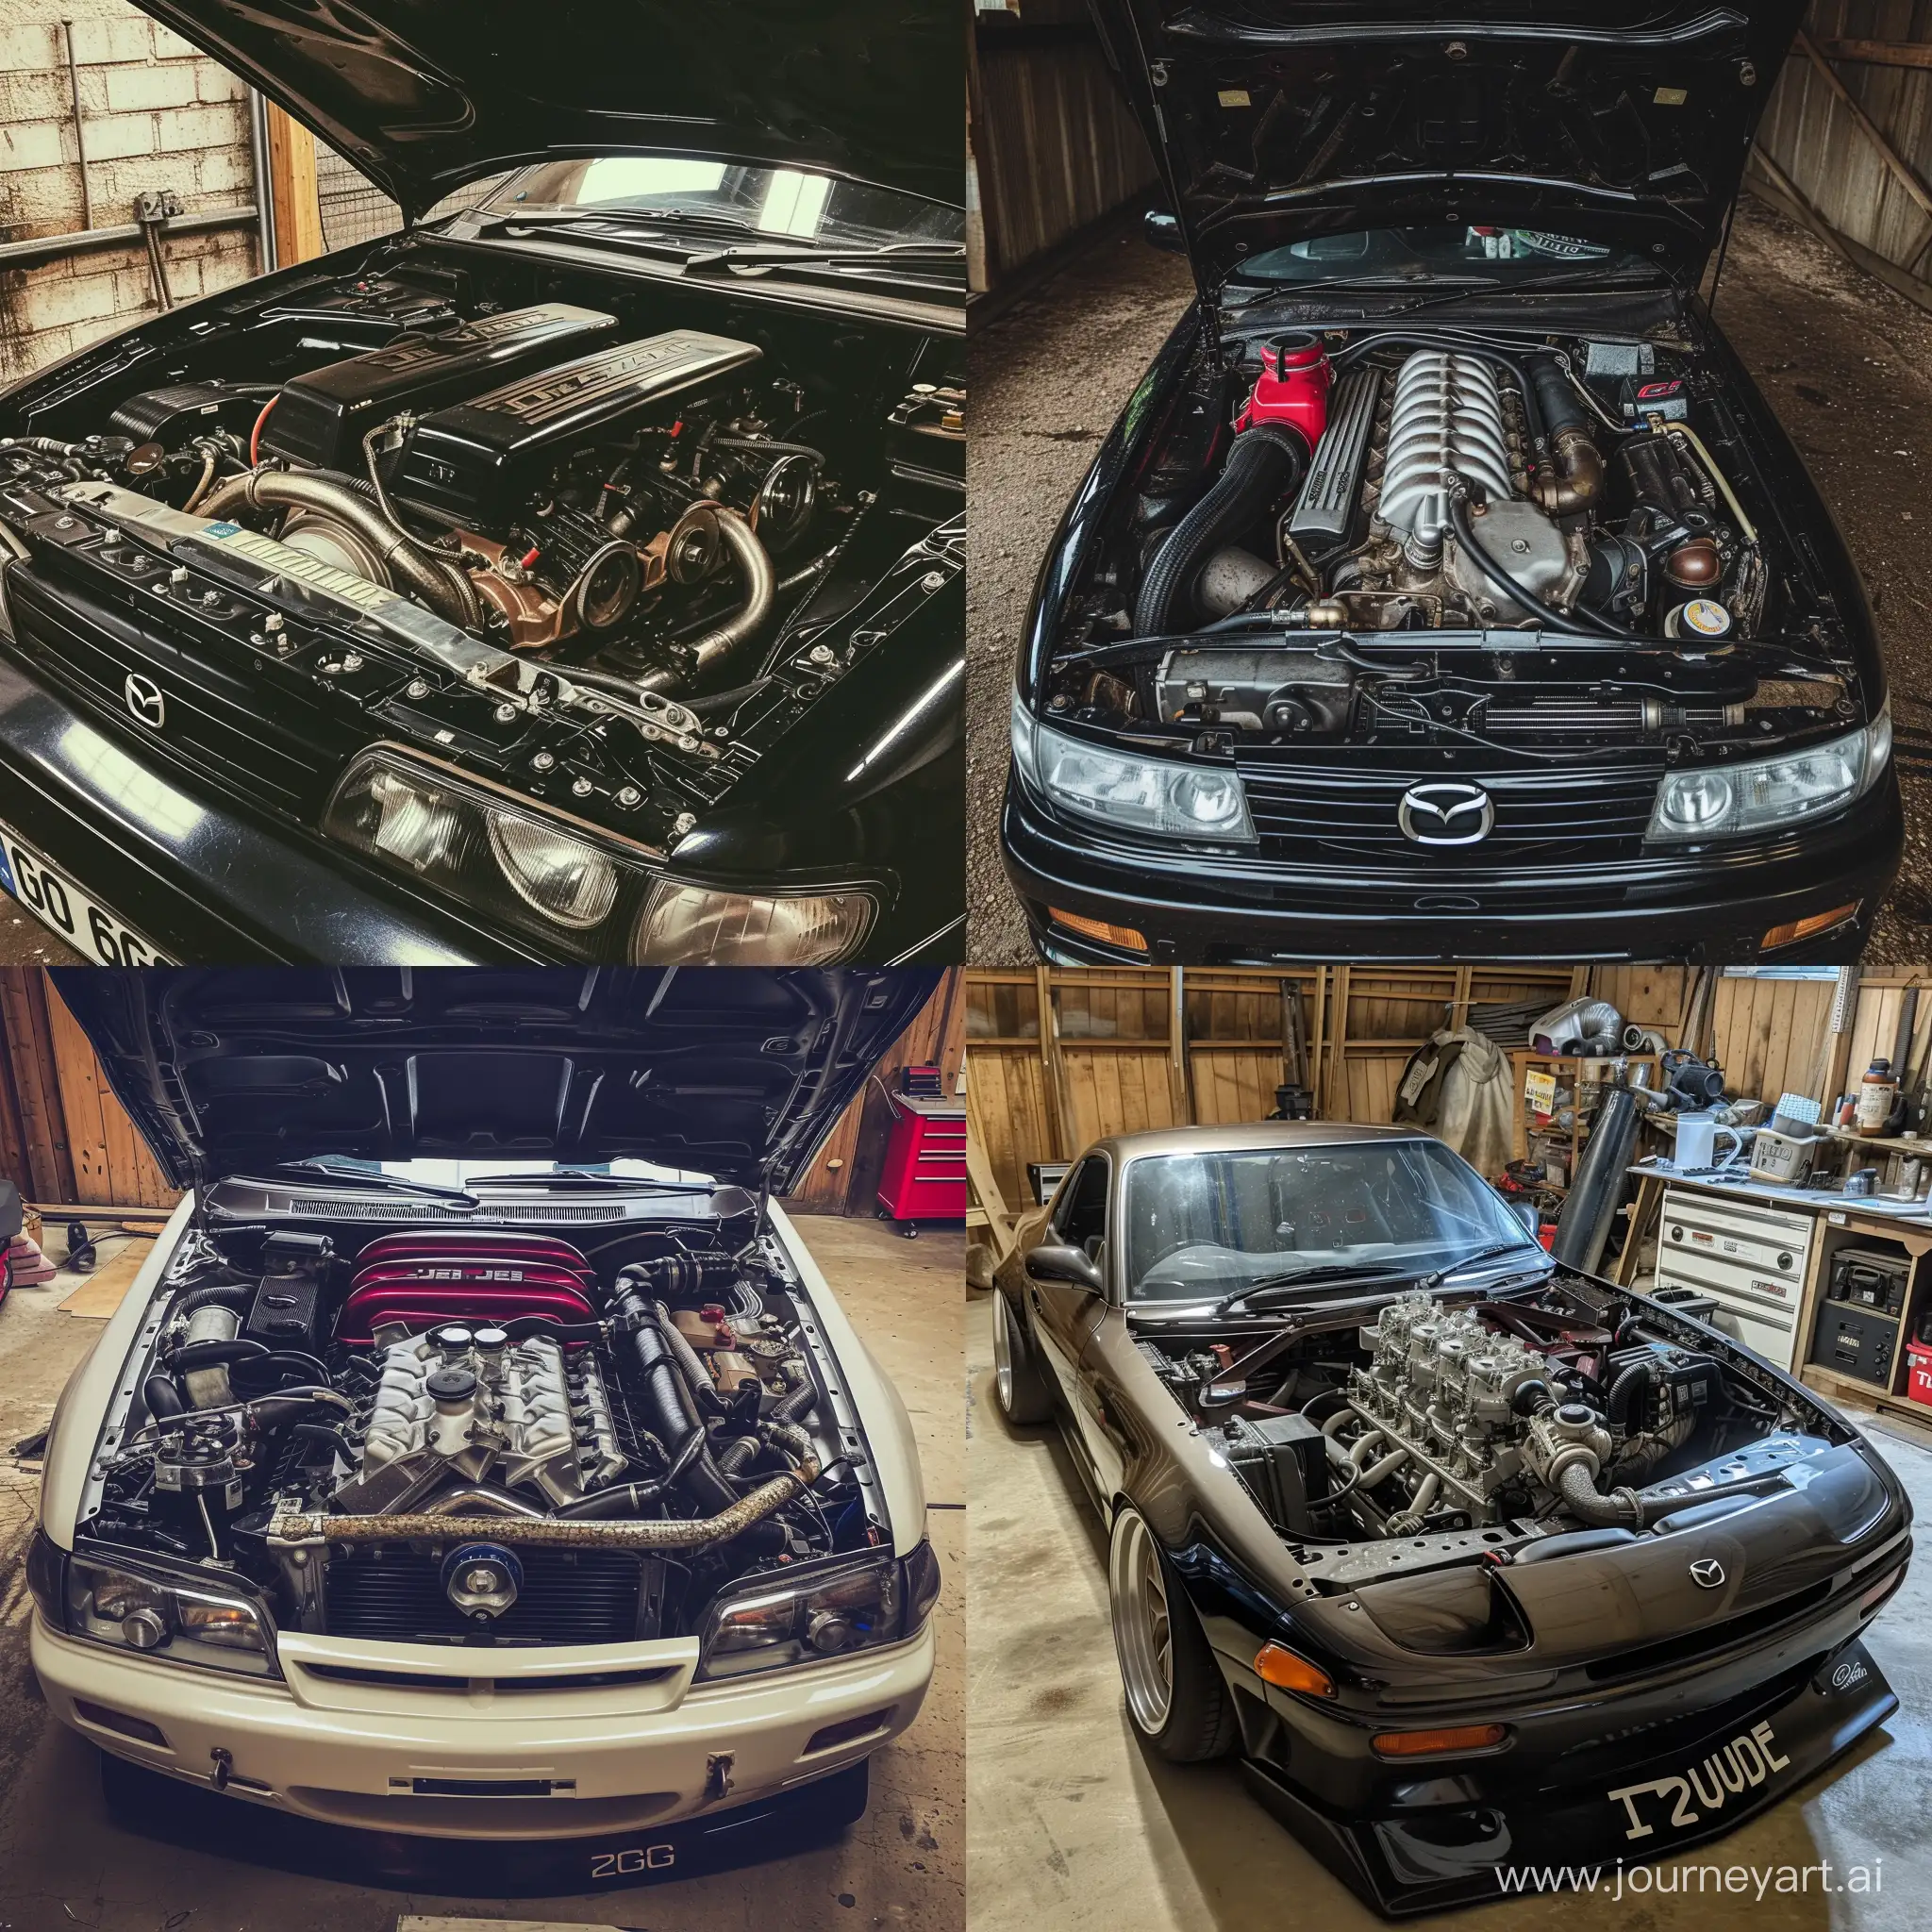 Mazda-6GG-with-2JZ-Engine-Swap-Reviving-an-Old-Garage-Powerhouse